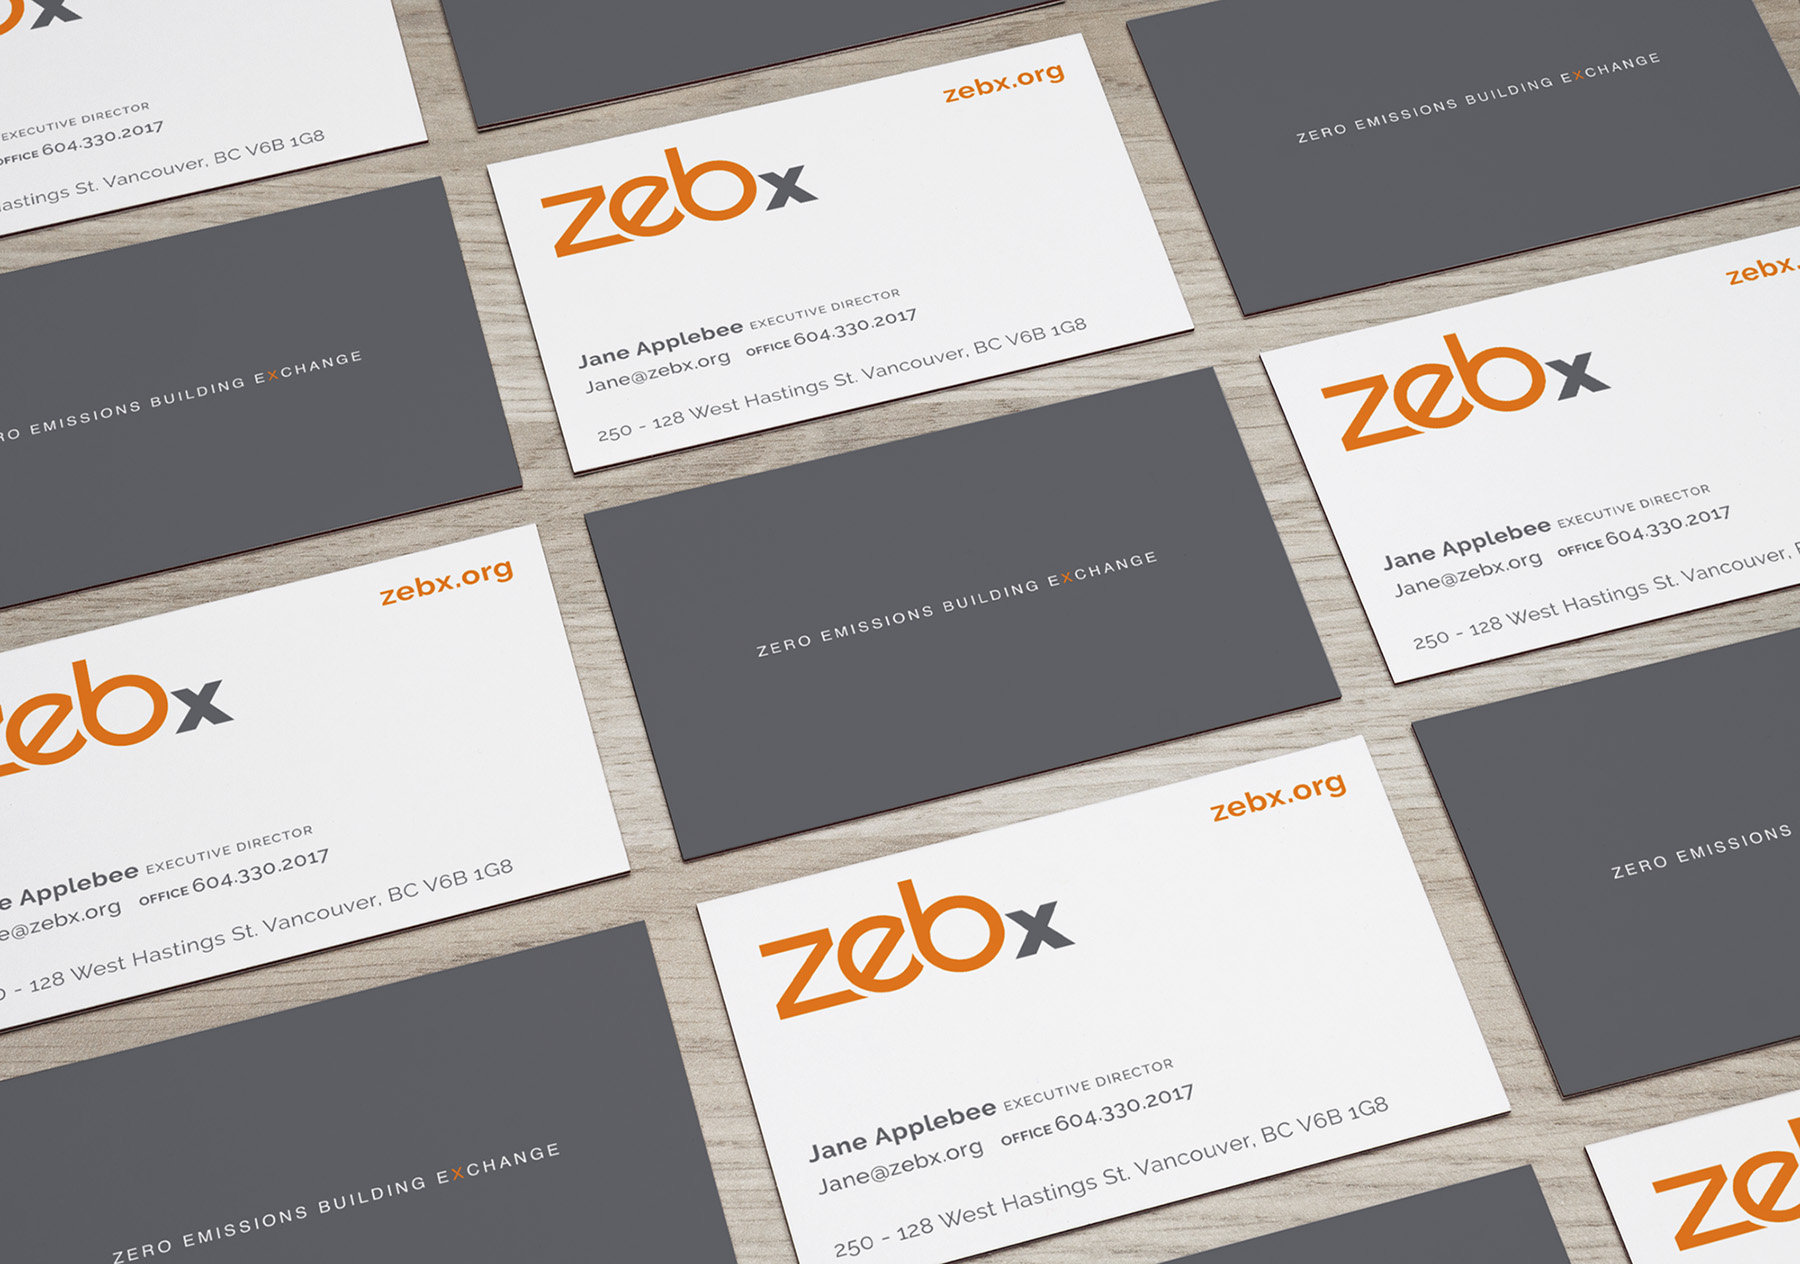 ZEBx refreshed business cards